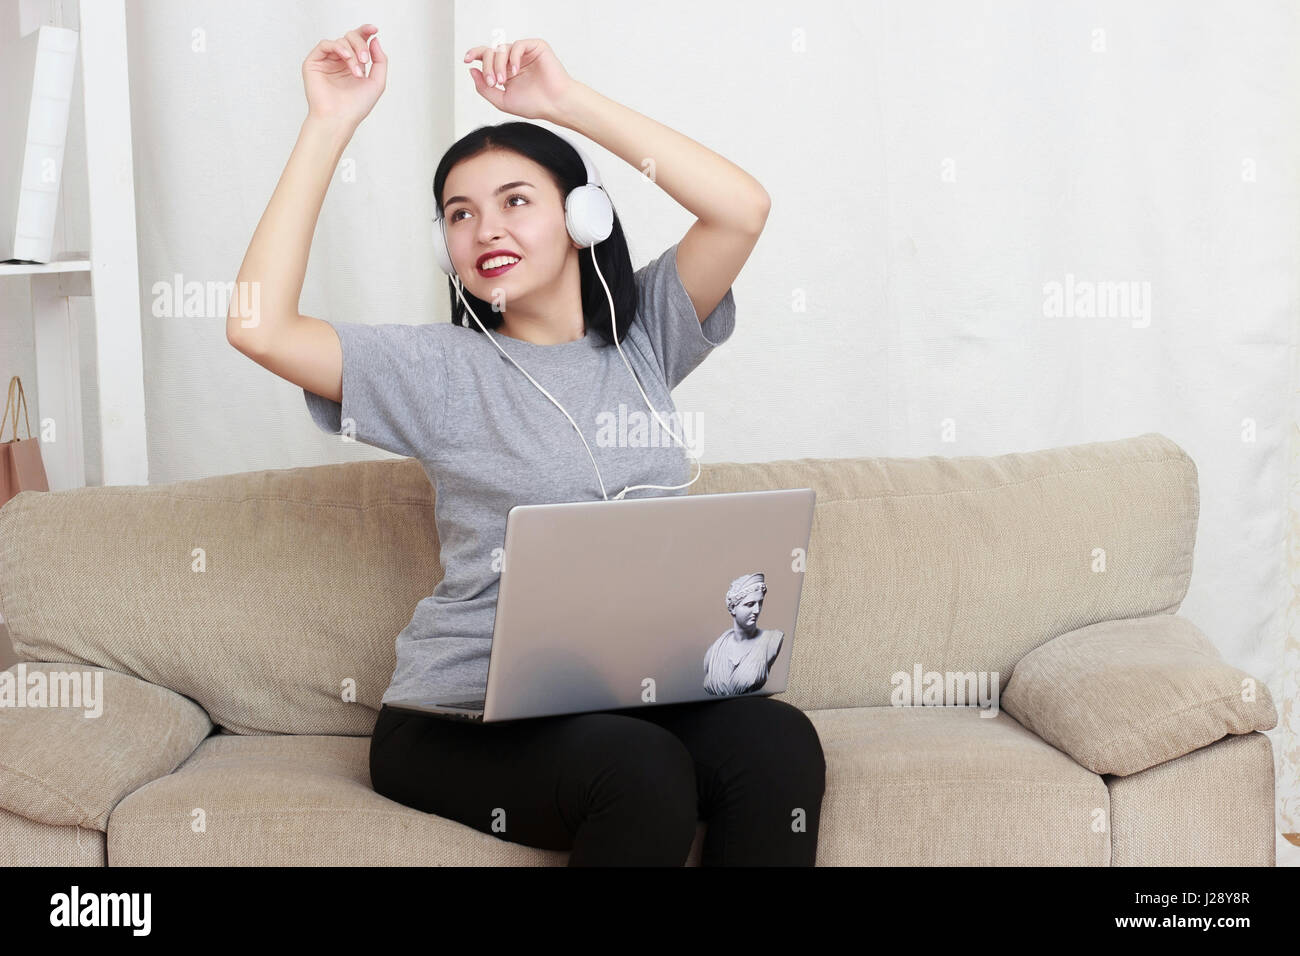 woman using laptop computer and headphones, sitting on living room Stock Photo